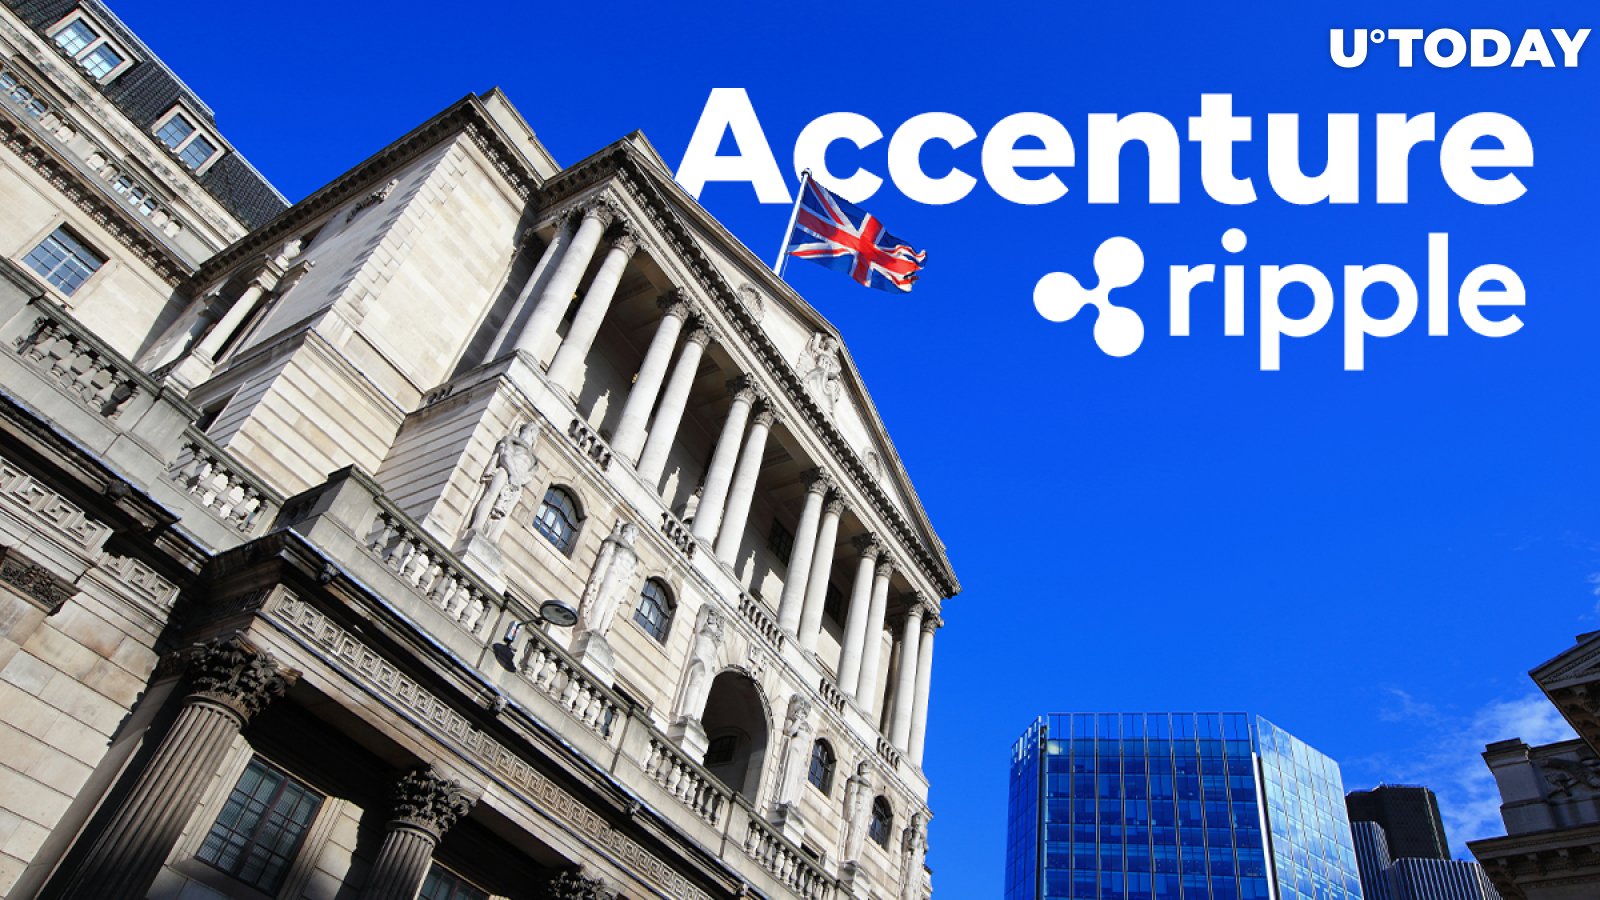 Ripple’s Partner Accenture Picked by Bank of England to Create New World Class Payment Service